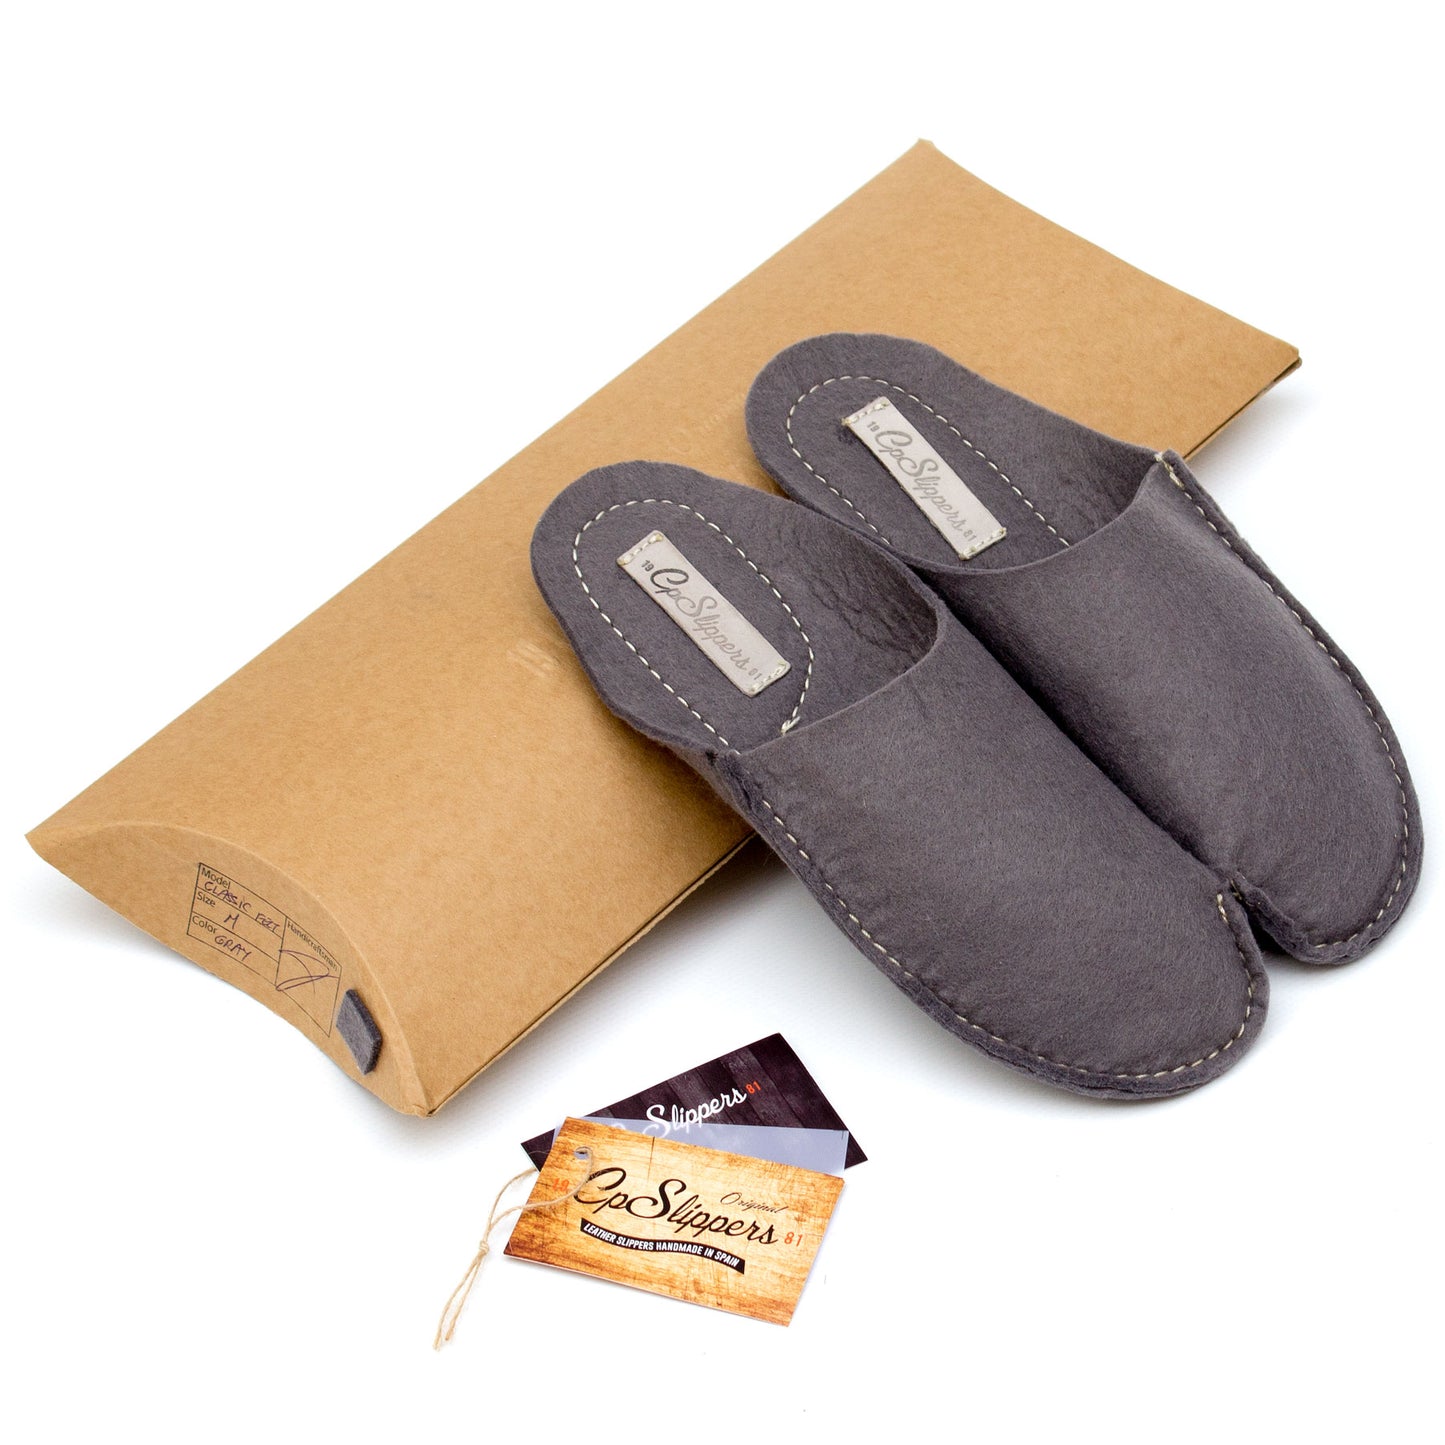 Gray CP Slippers Classic - CP Slippers